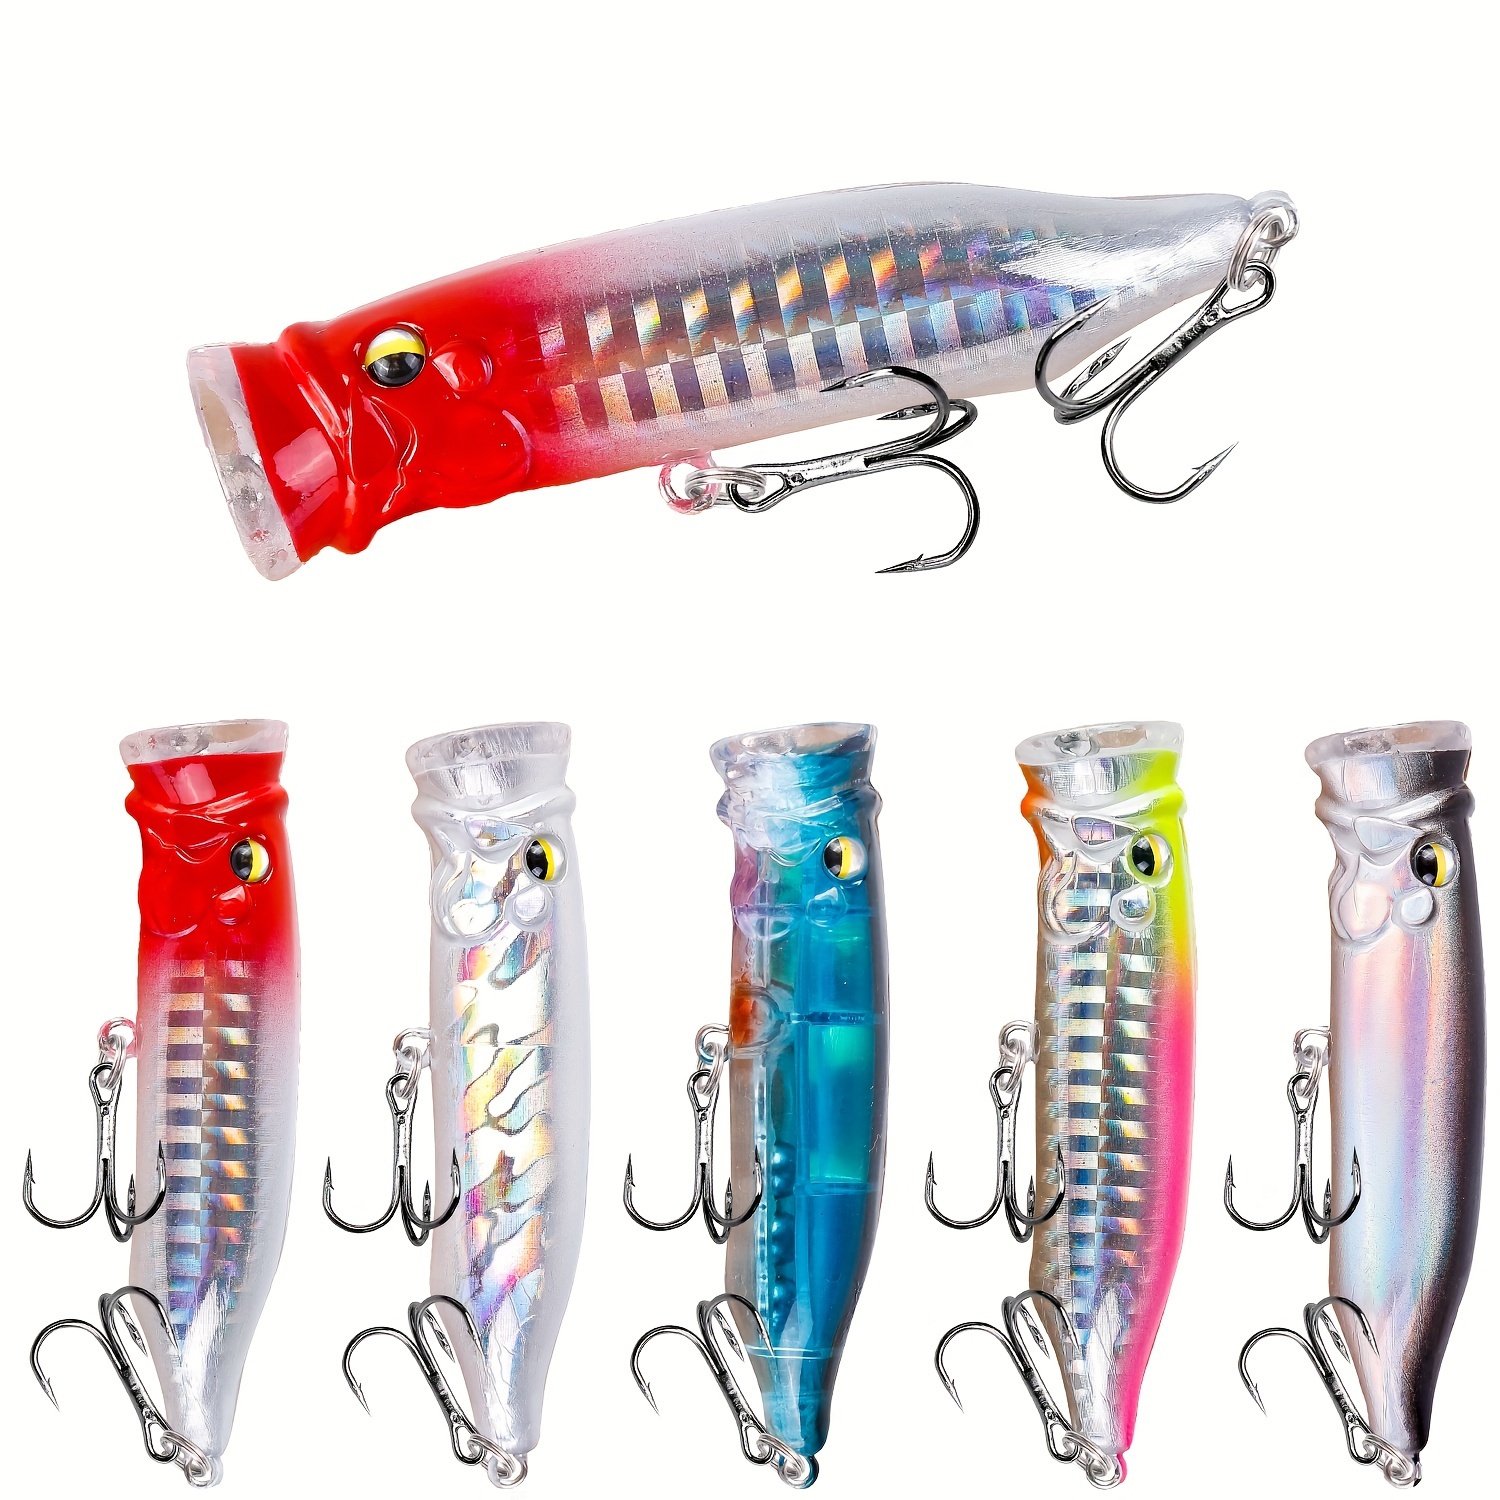 6Pcs/Lot 17CM/83G Saltwater Fishing Popper Lure Topwater Popper Lure  Artificial Lure Big Game 3D Eyes Hard Baits with Treble Hooks for GT  Striped Bass,Trout,Tuna,Kingfish (C 3PCS), Topwater Lures -  Canada